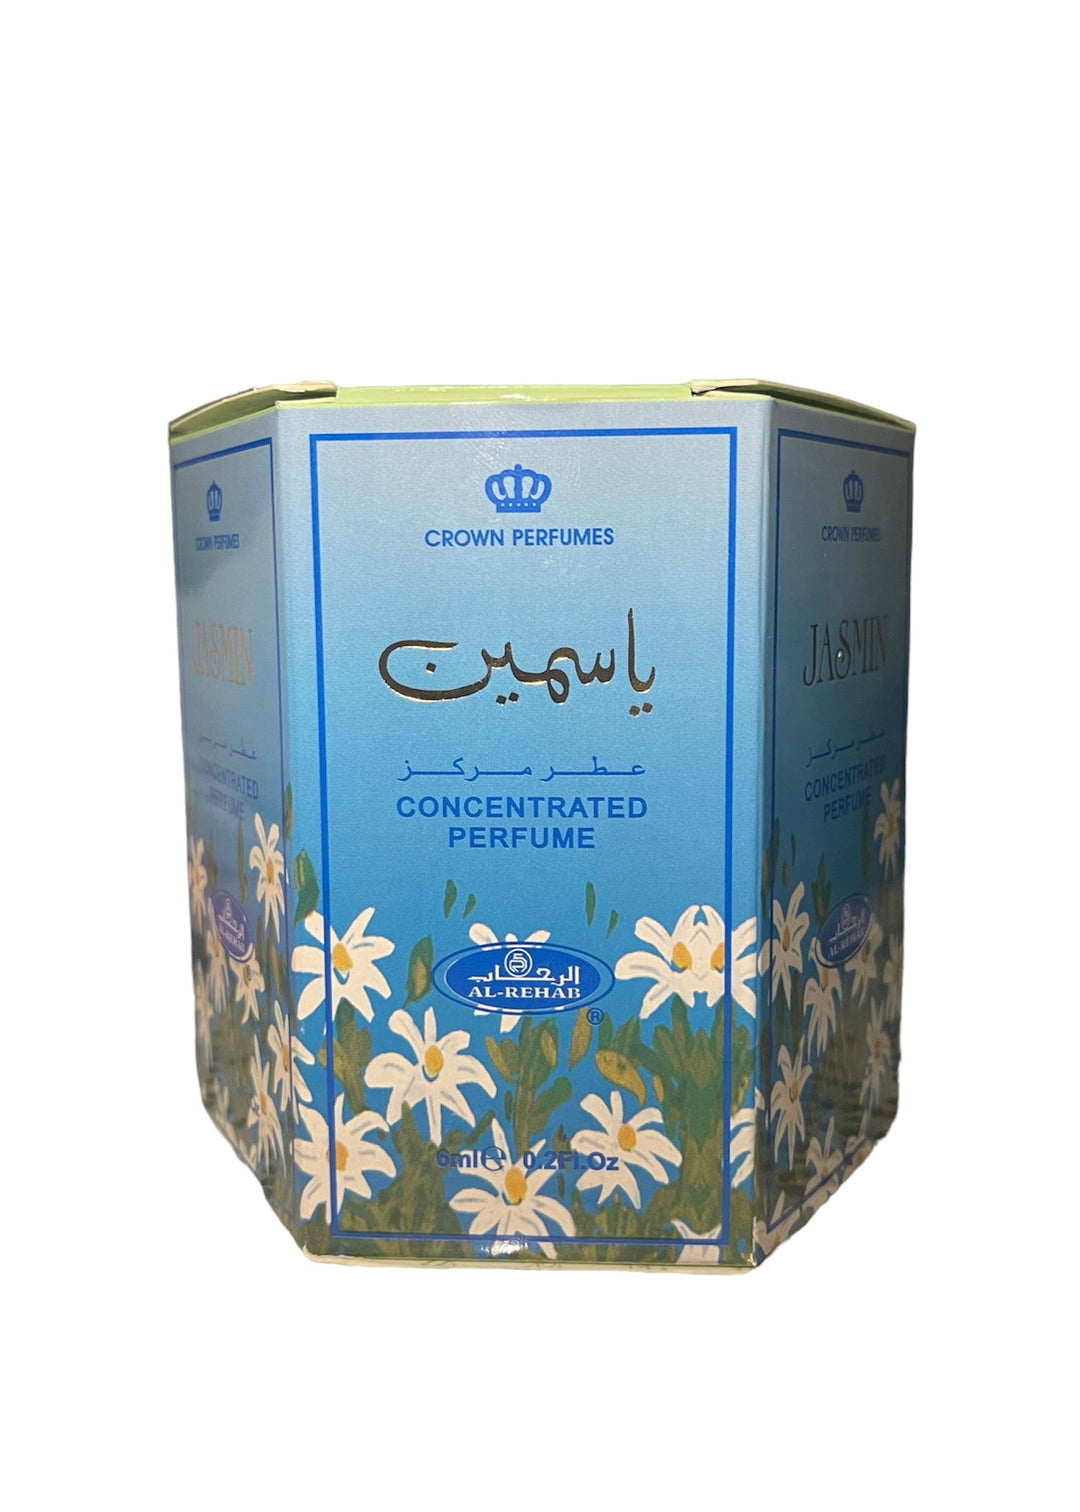 Jasmine Concentrated Perfume